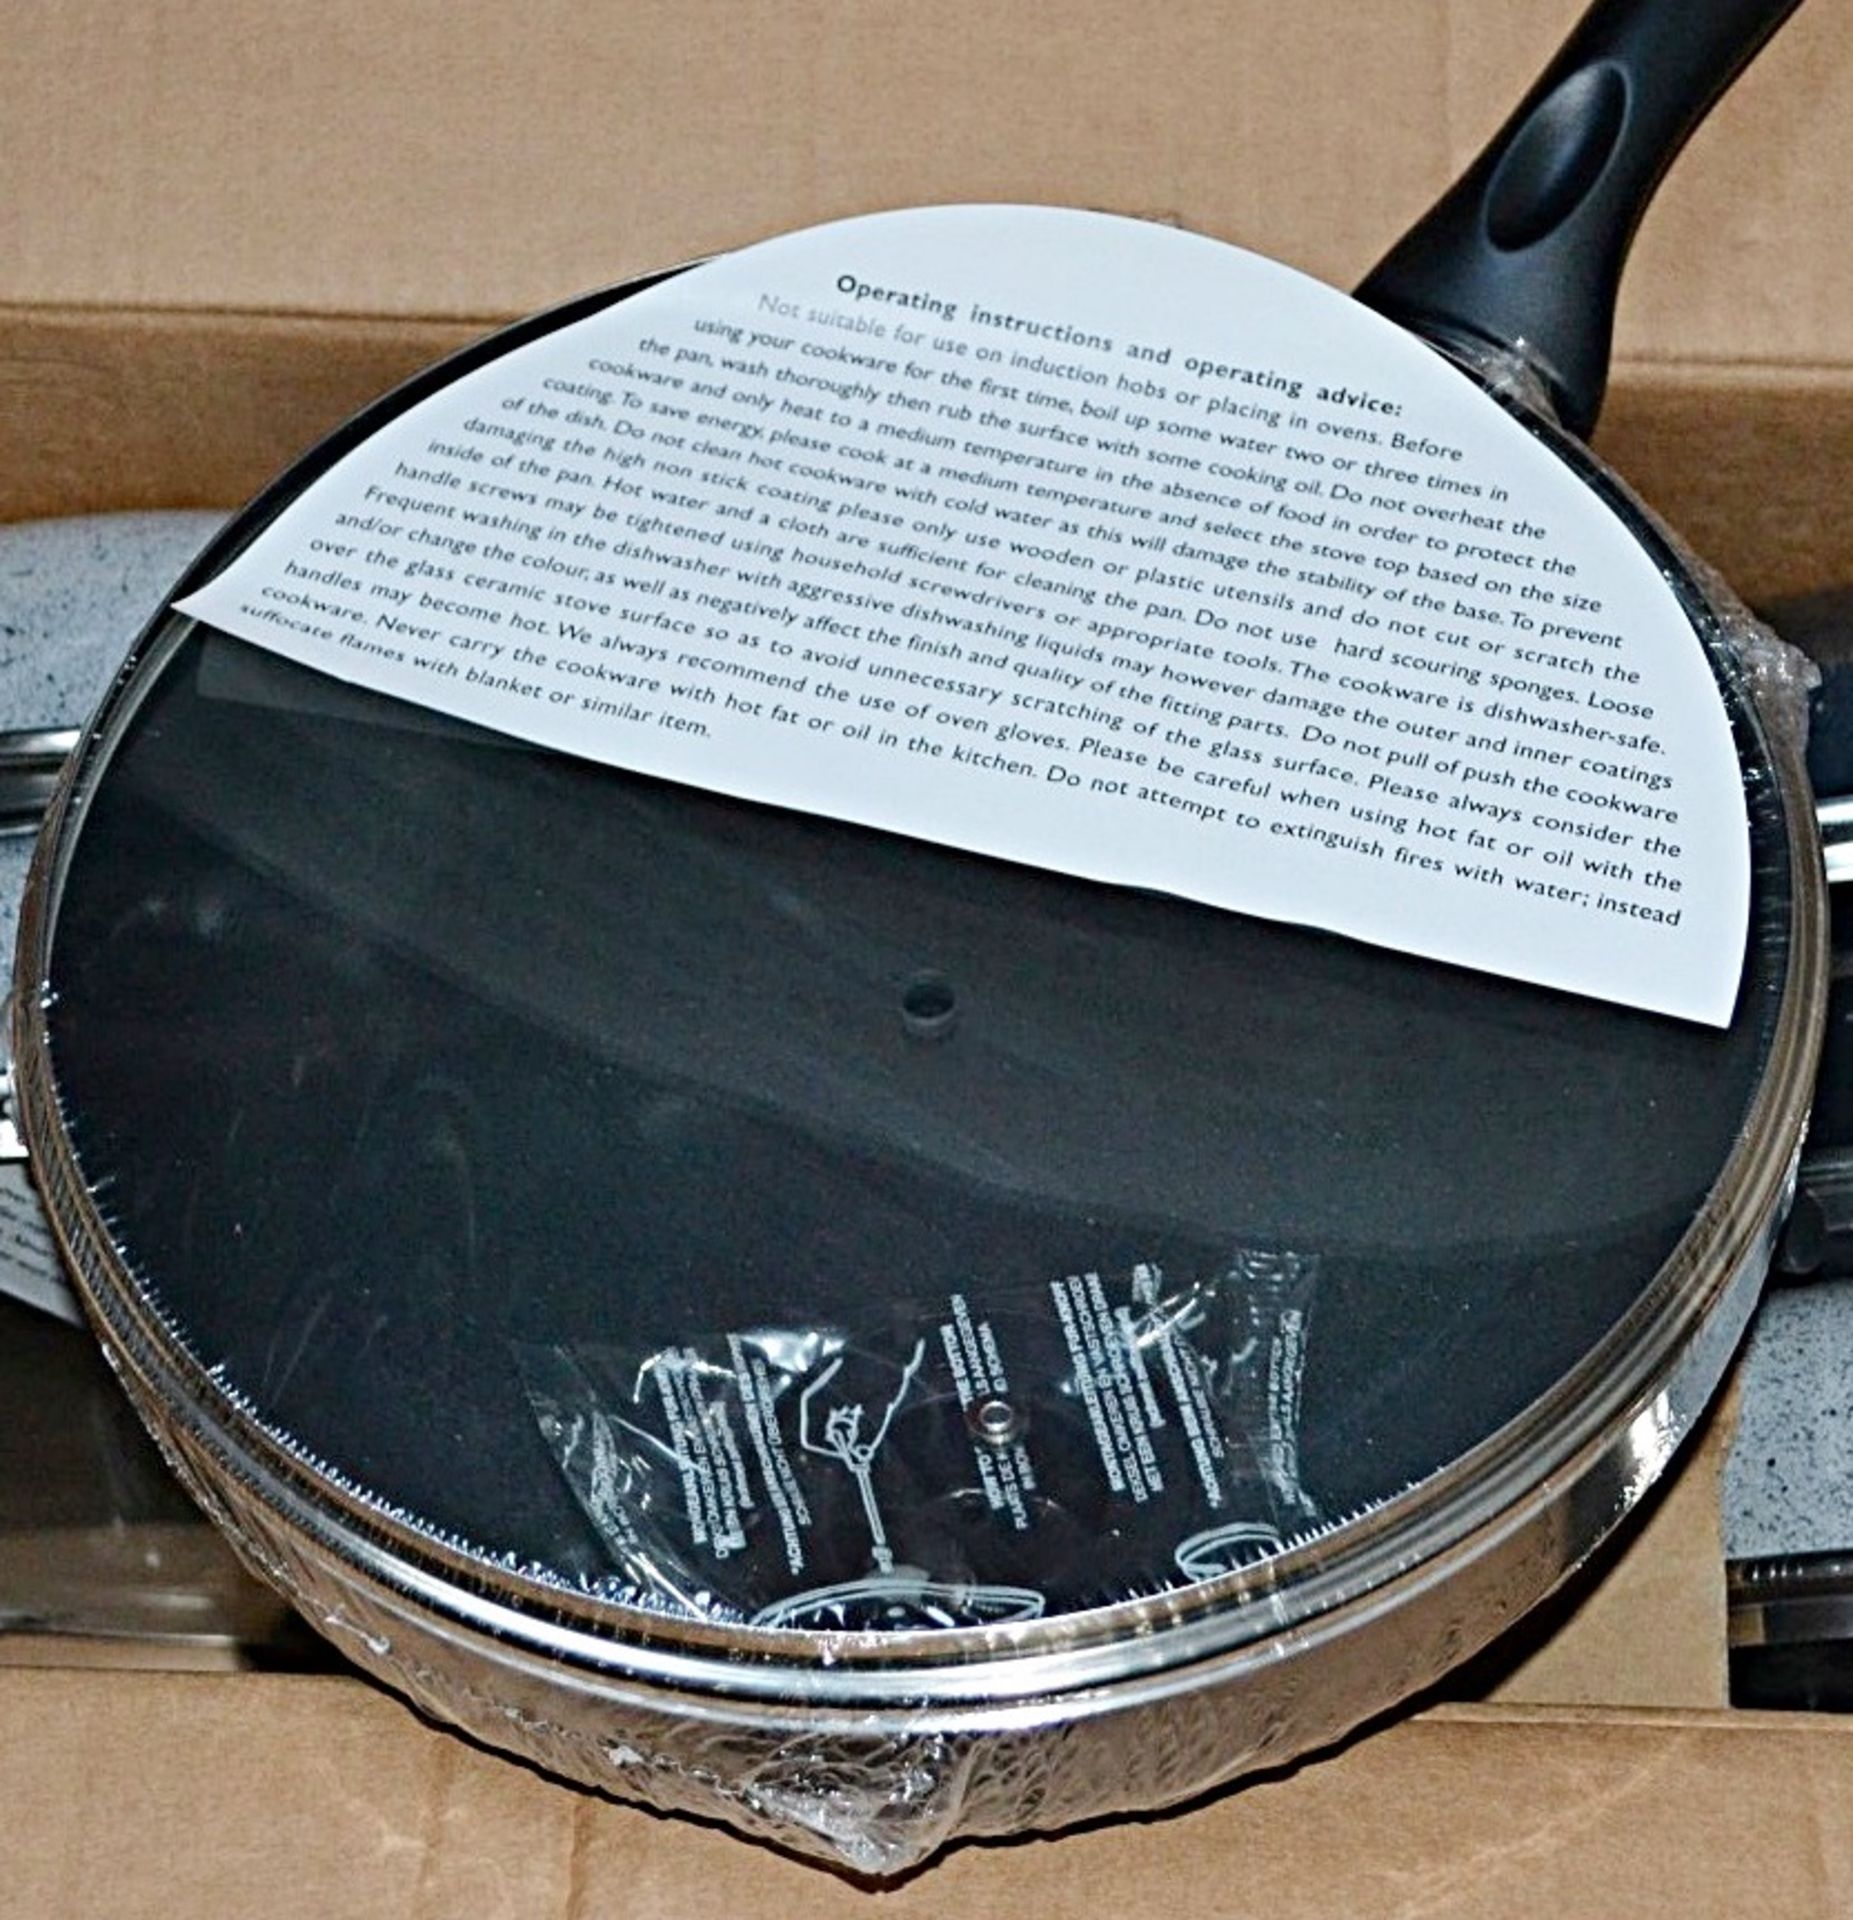 1 x 28cm Non-stick Frying Pans with Glass Lids - Colour: Black - Made In Italy - New & Sealed Stock, - Bild 3 aus 5